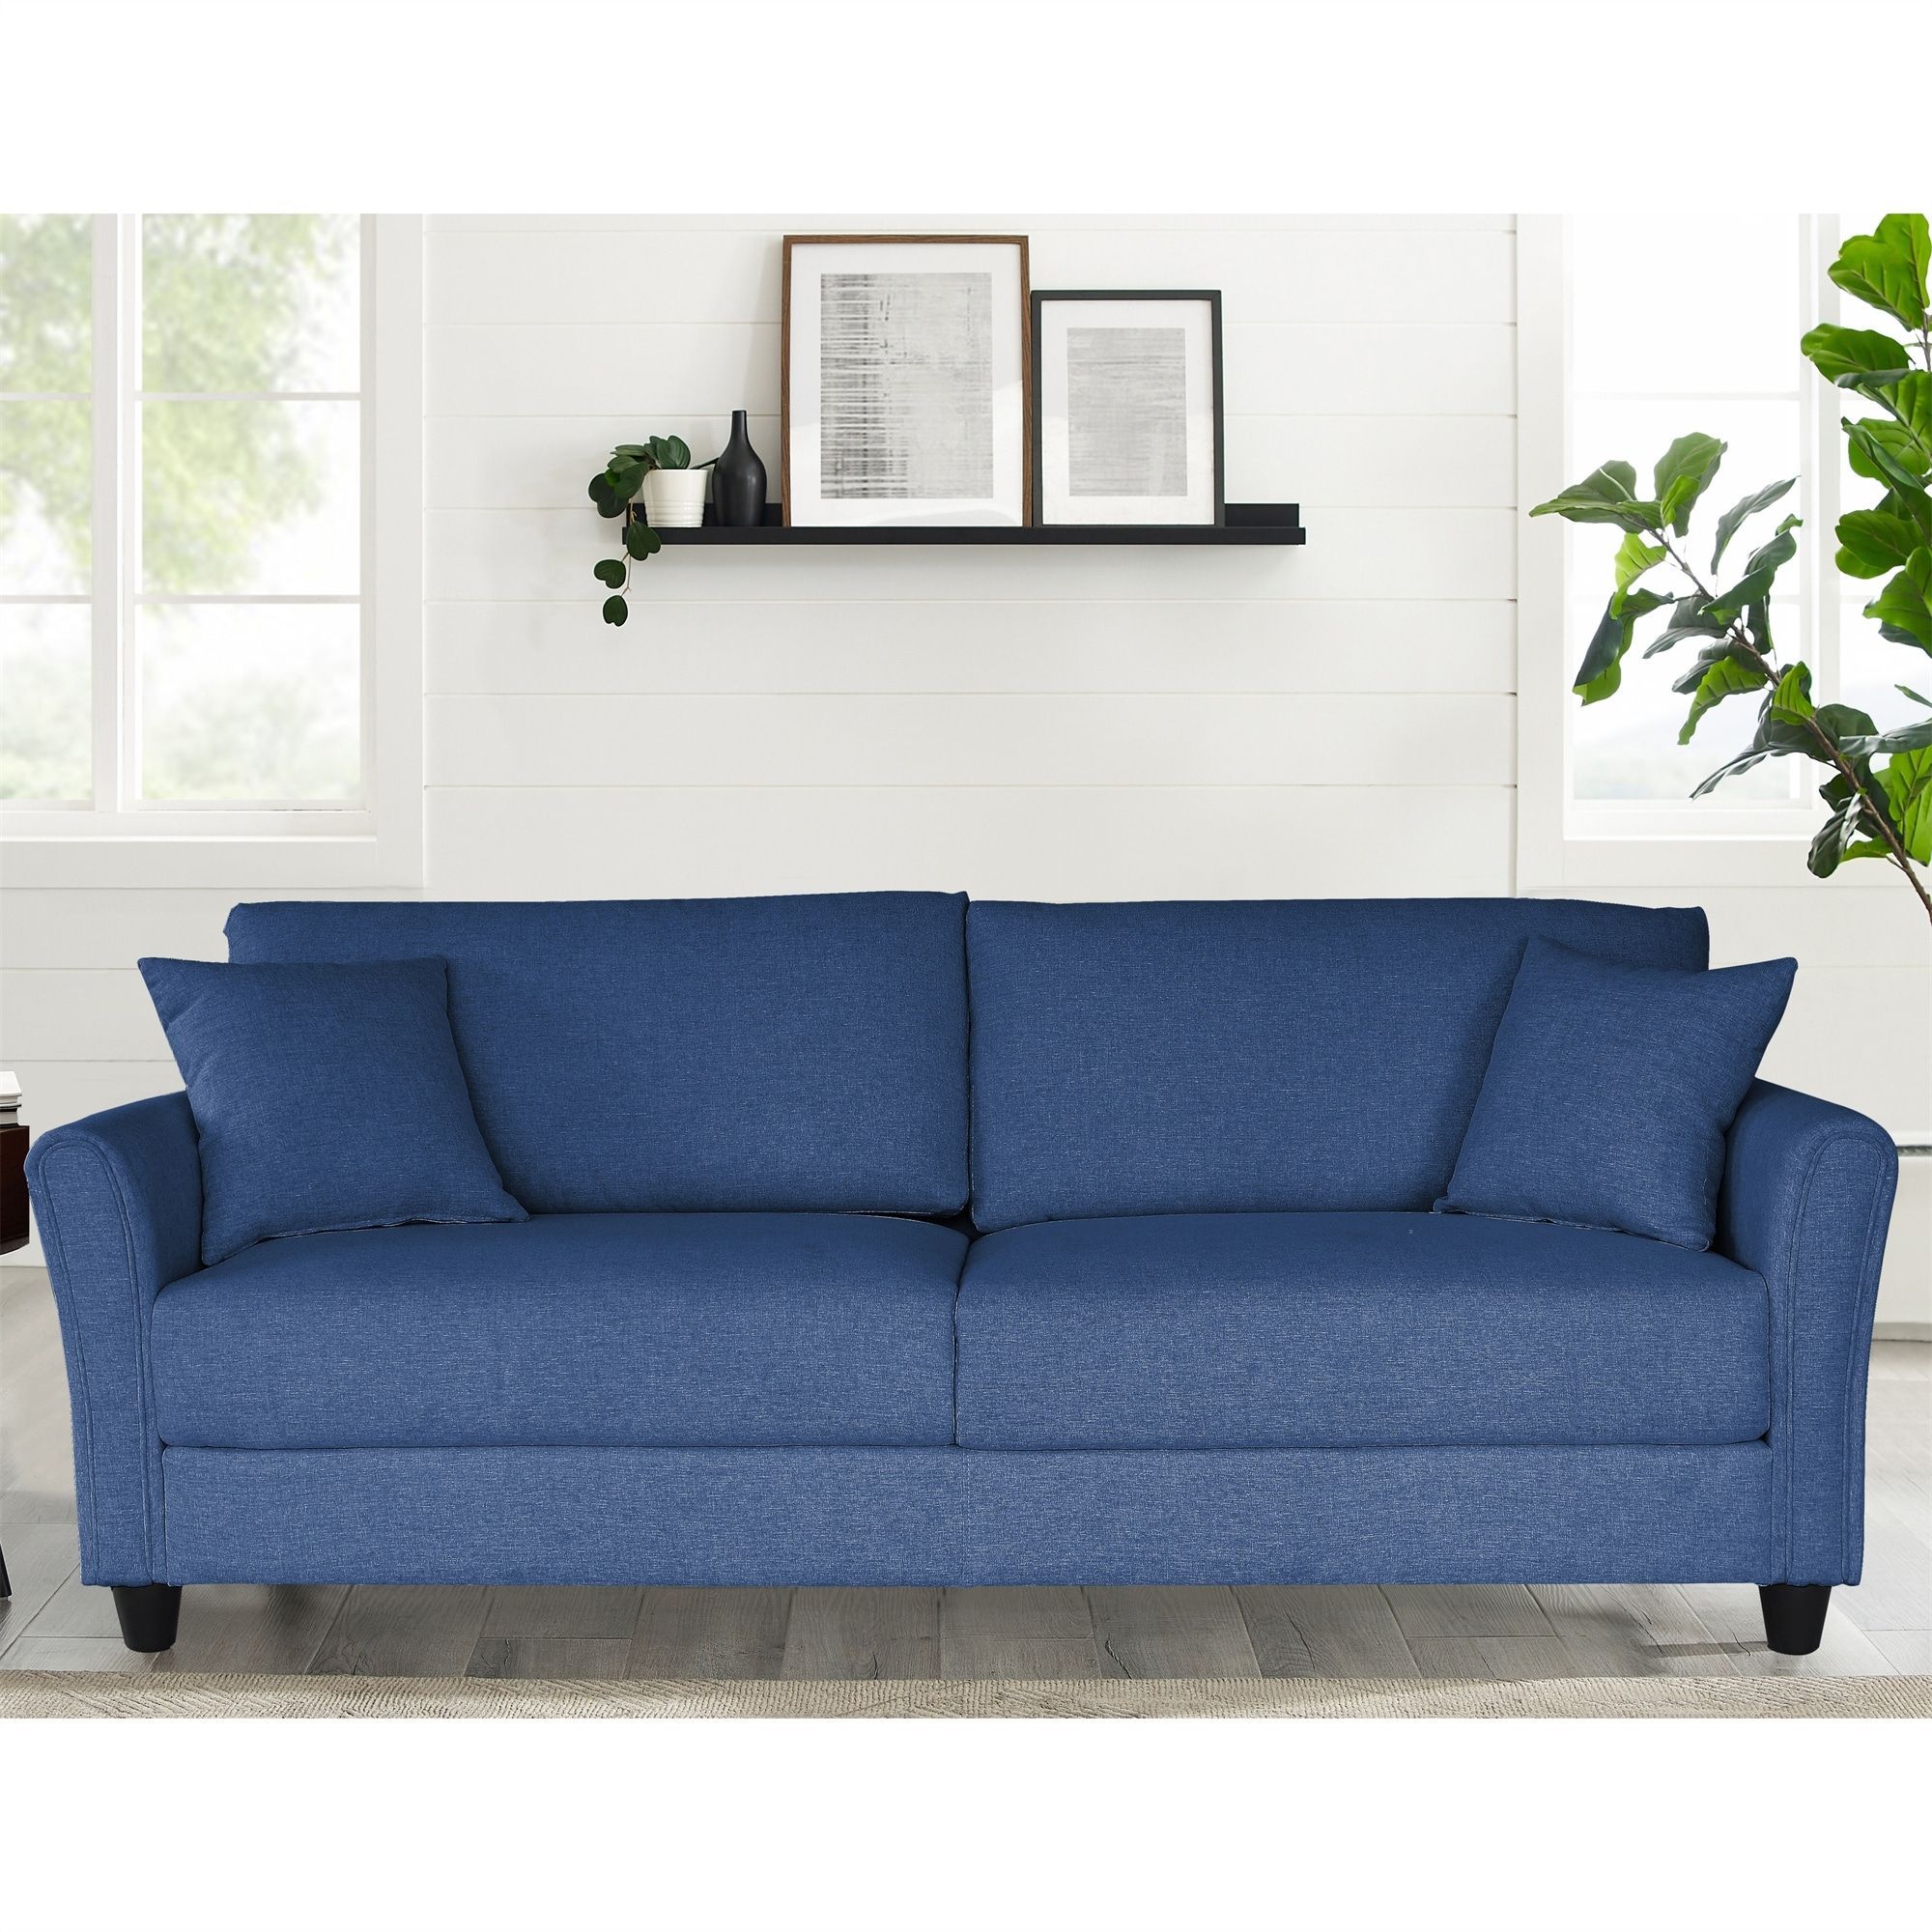 Blue Linen Three Seat Sofa – Bed Bath & Beyond – 36602793 With Modern Blue Linen Sofas (View 3 of 15)